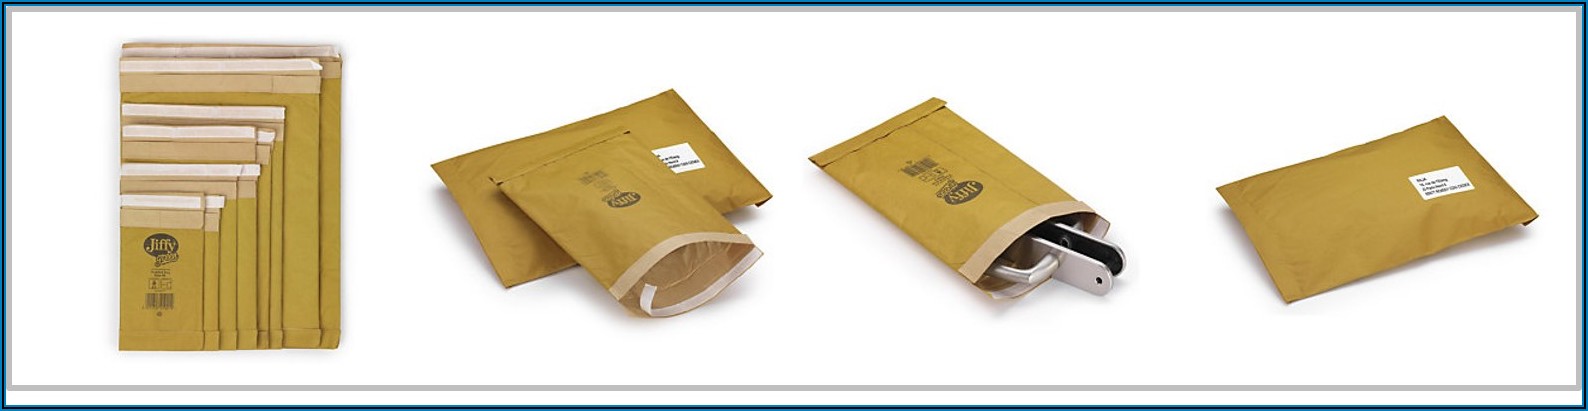 Can You Recycle Padded Envelopes Uk